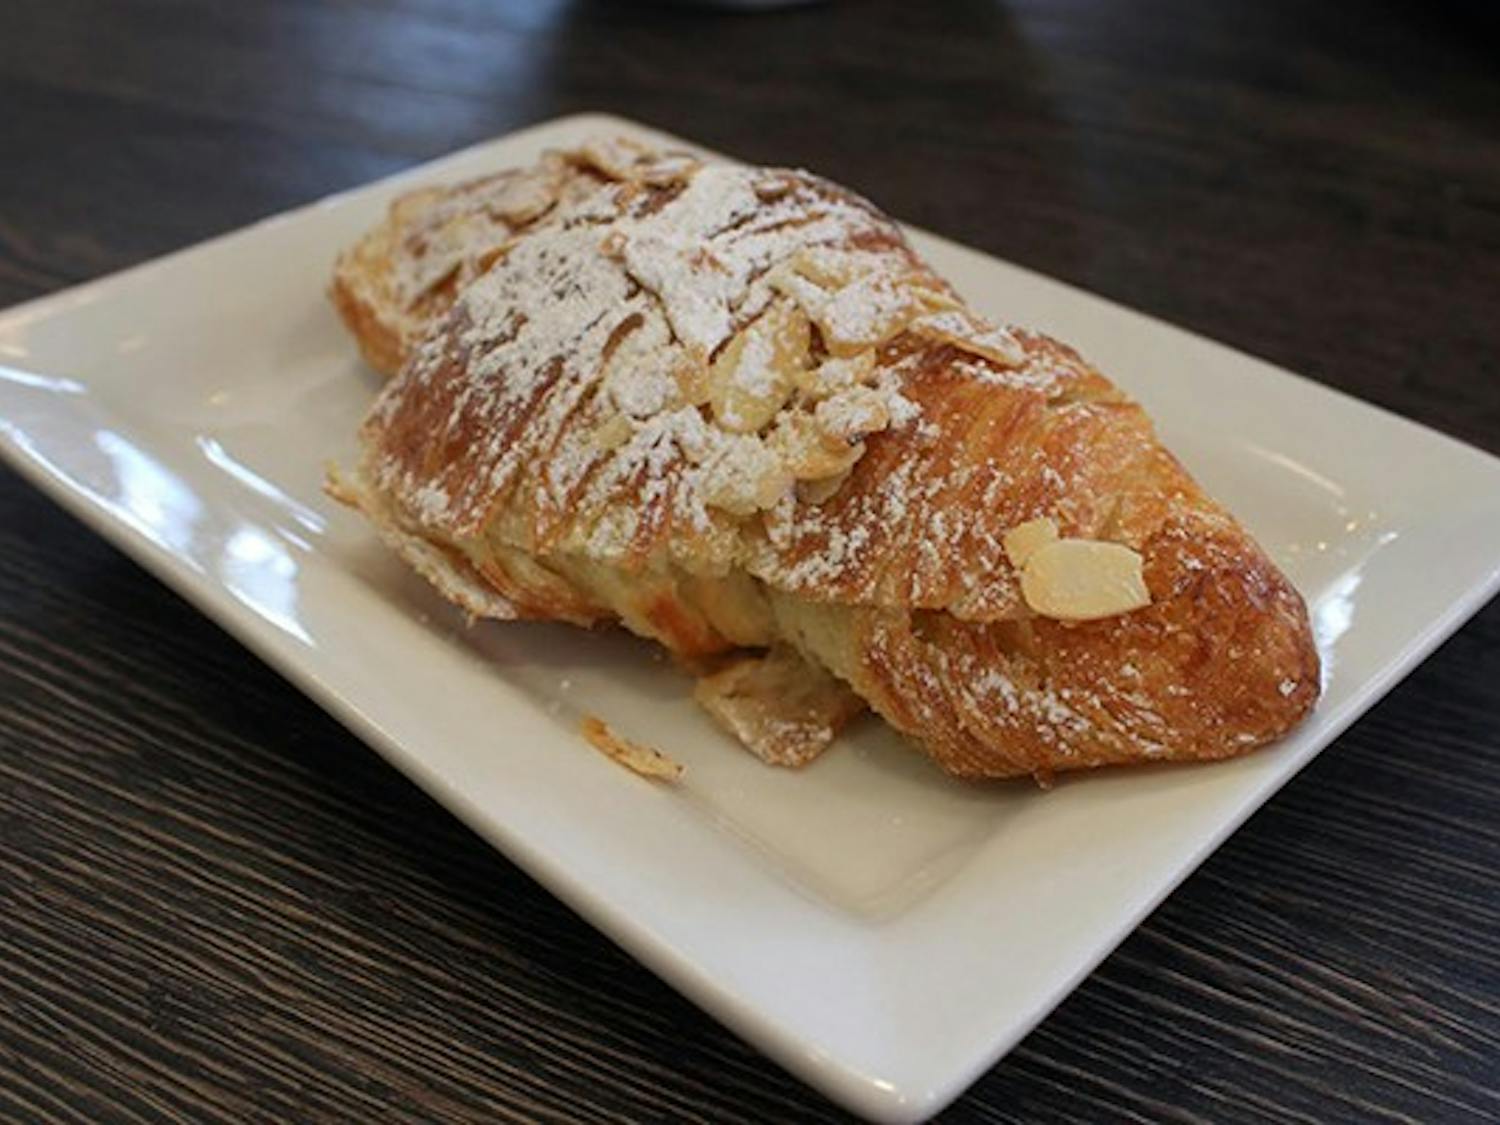 The almond croissant, as well as the Nutella Macchiato, are house favorites at Delice Bistro on Mill Ave.  (Photo by Micaela Rodriguez)